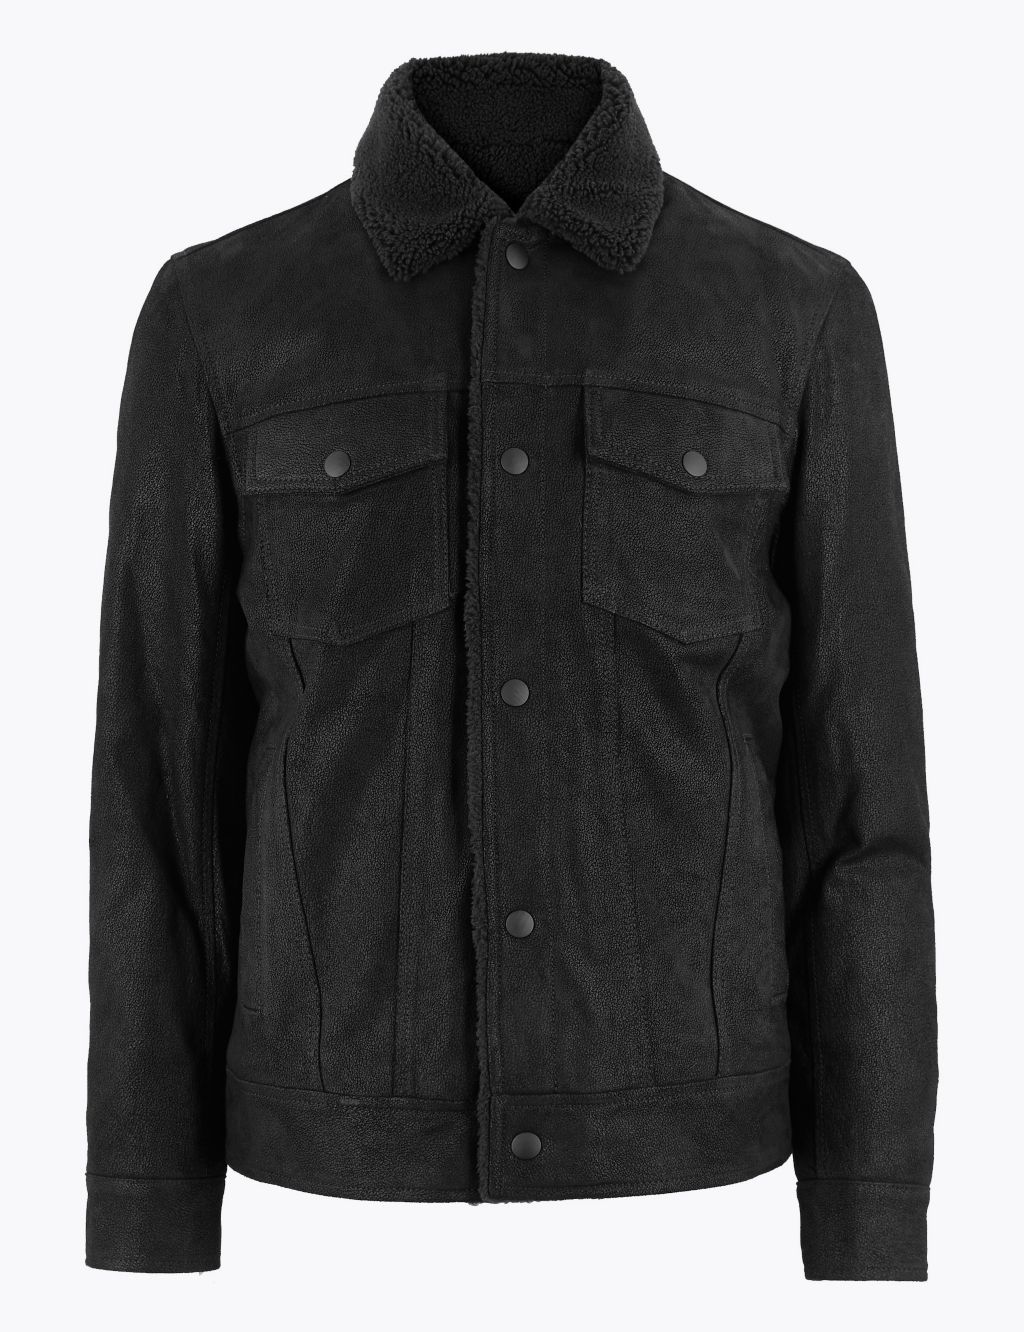 Leather Borg Lined Jacket | M&S Collection | M&S